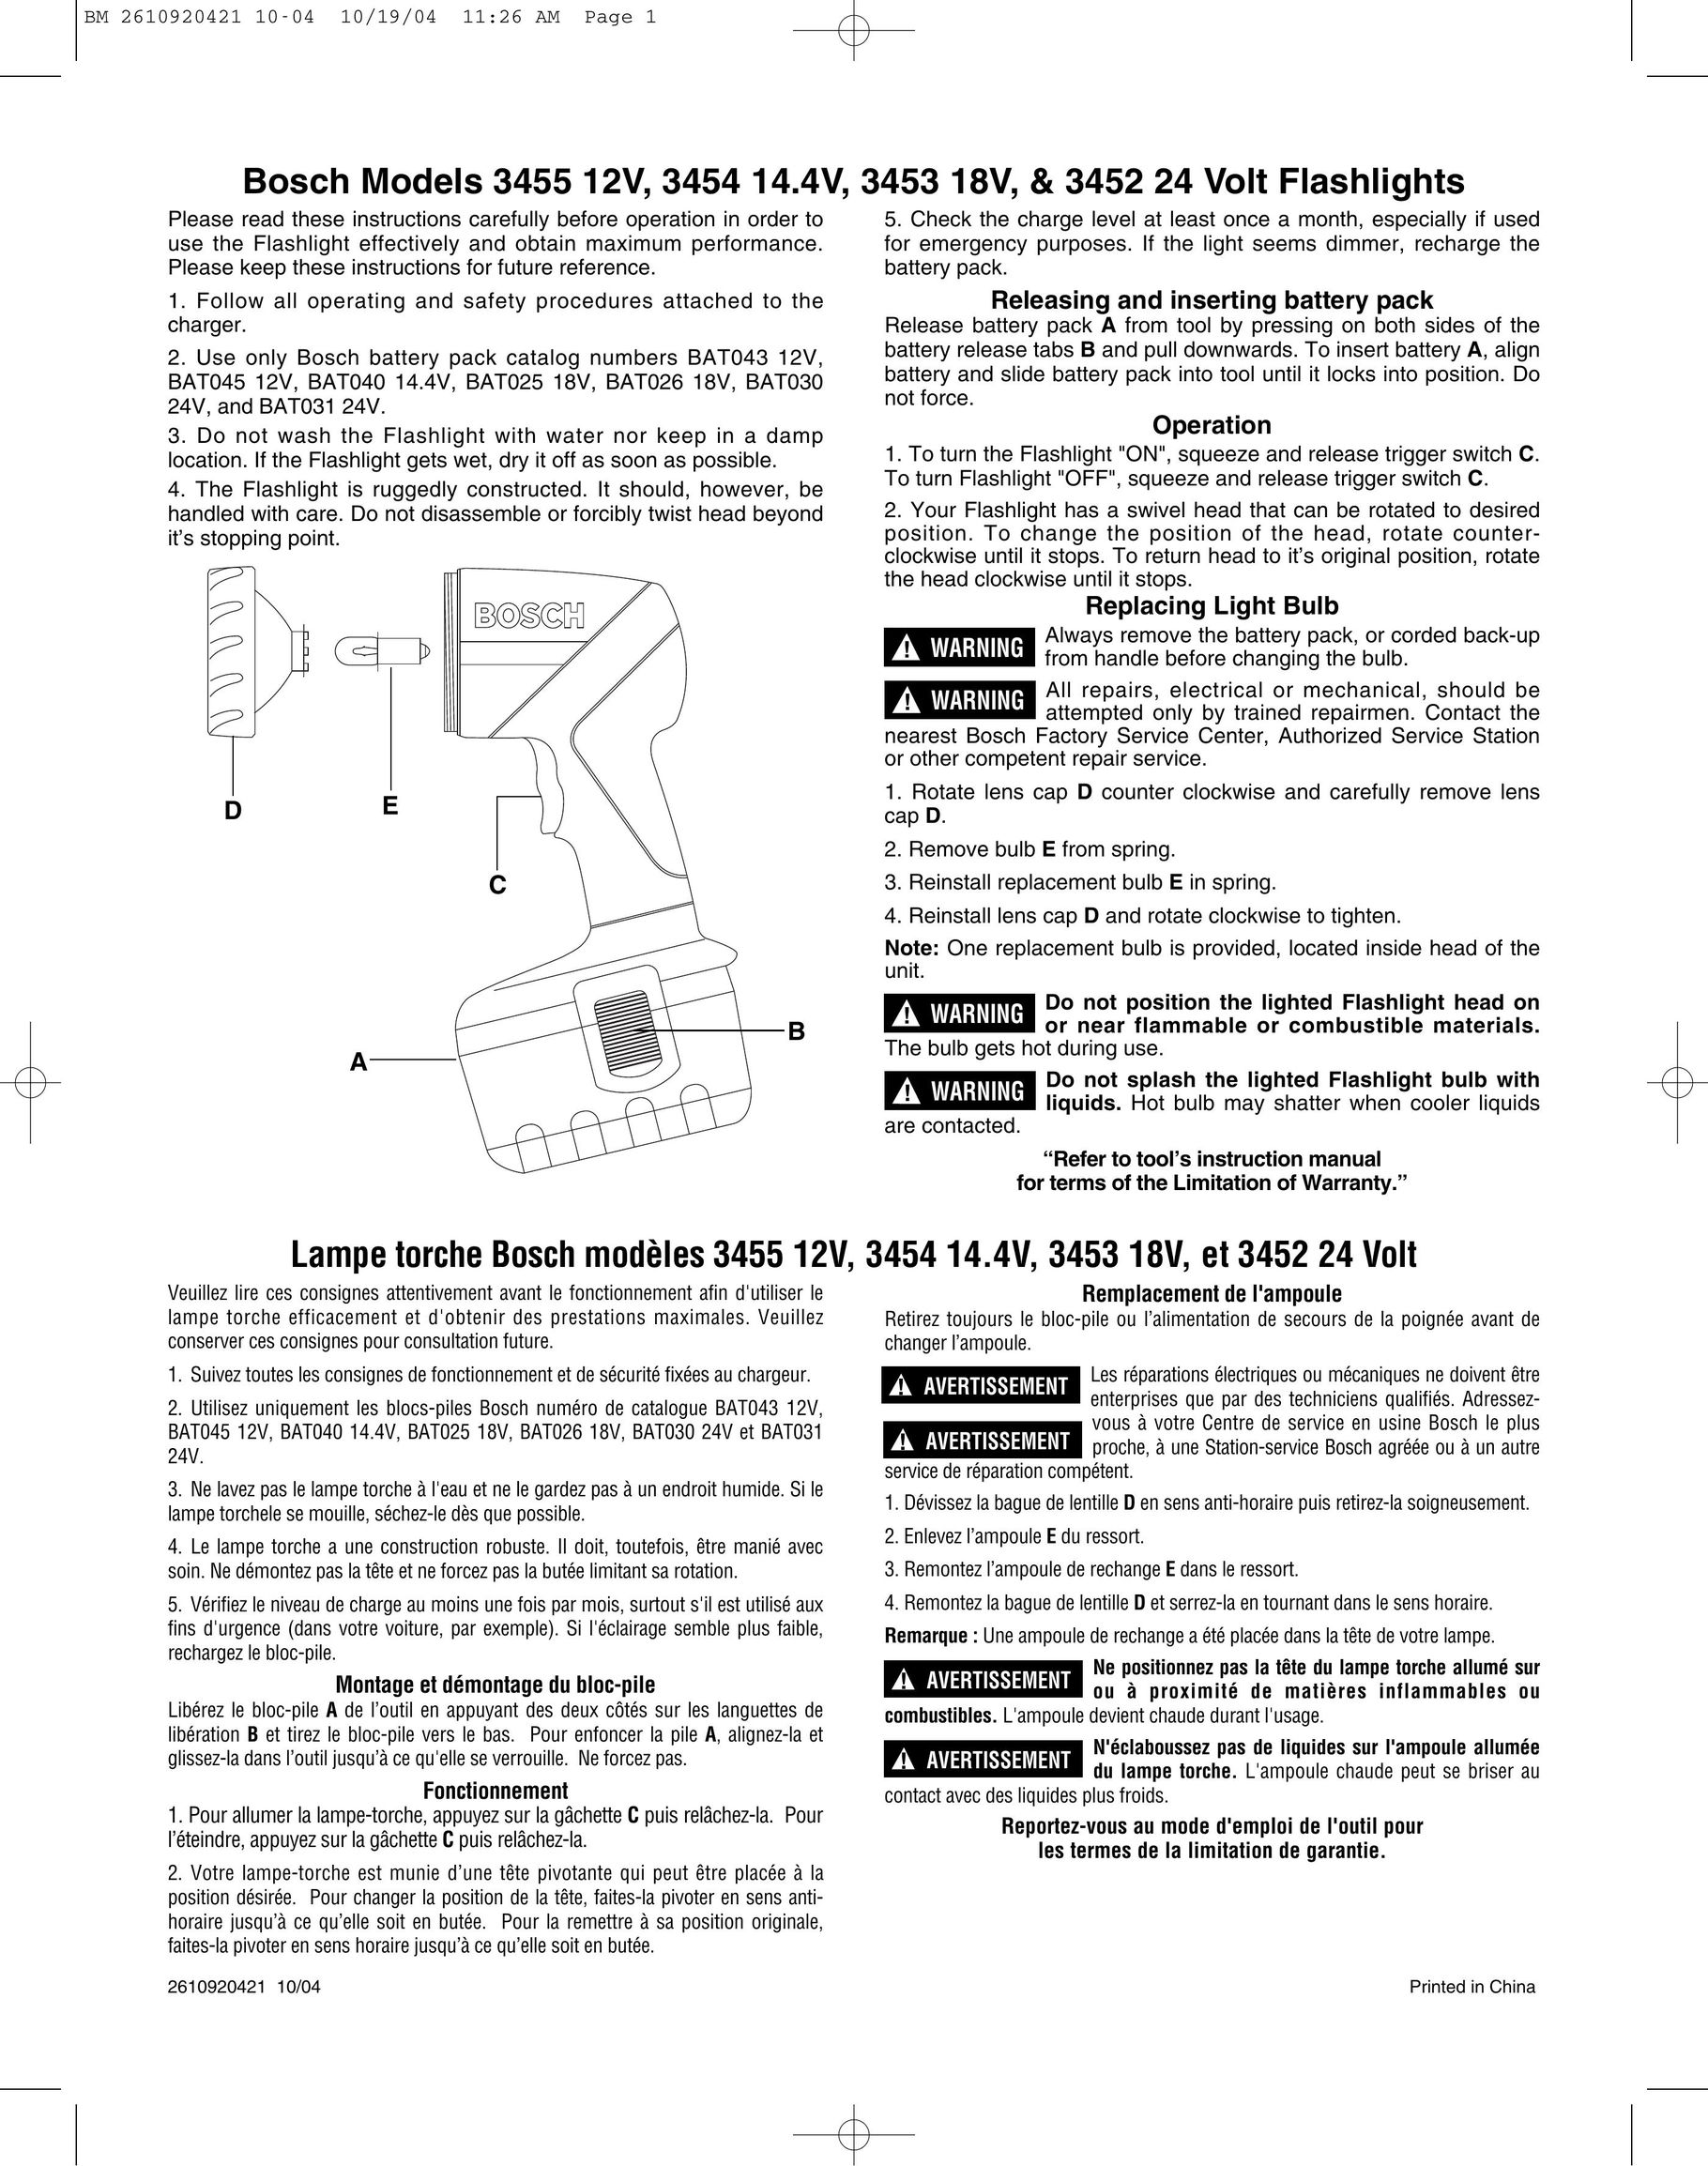 Bosch Appliances 3453 18V Home Safety Product User Manual